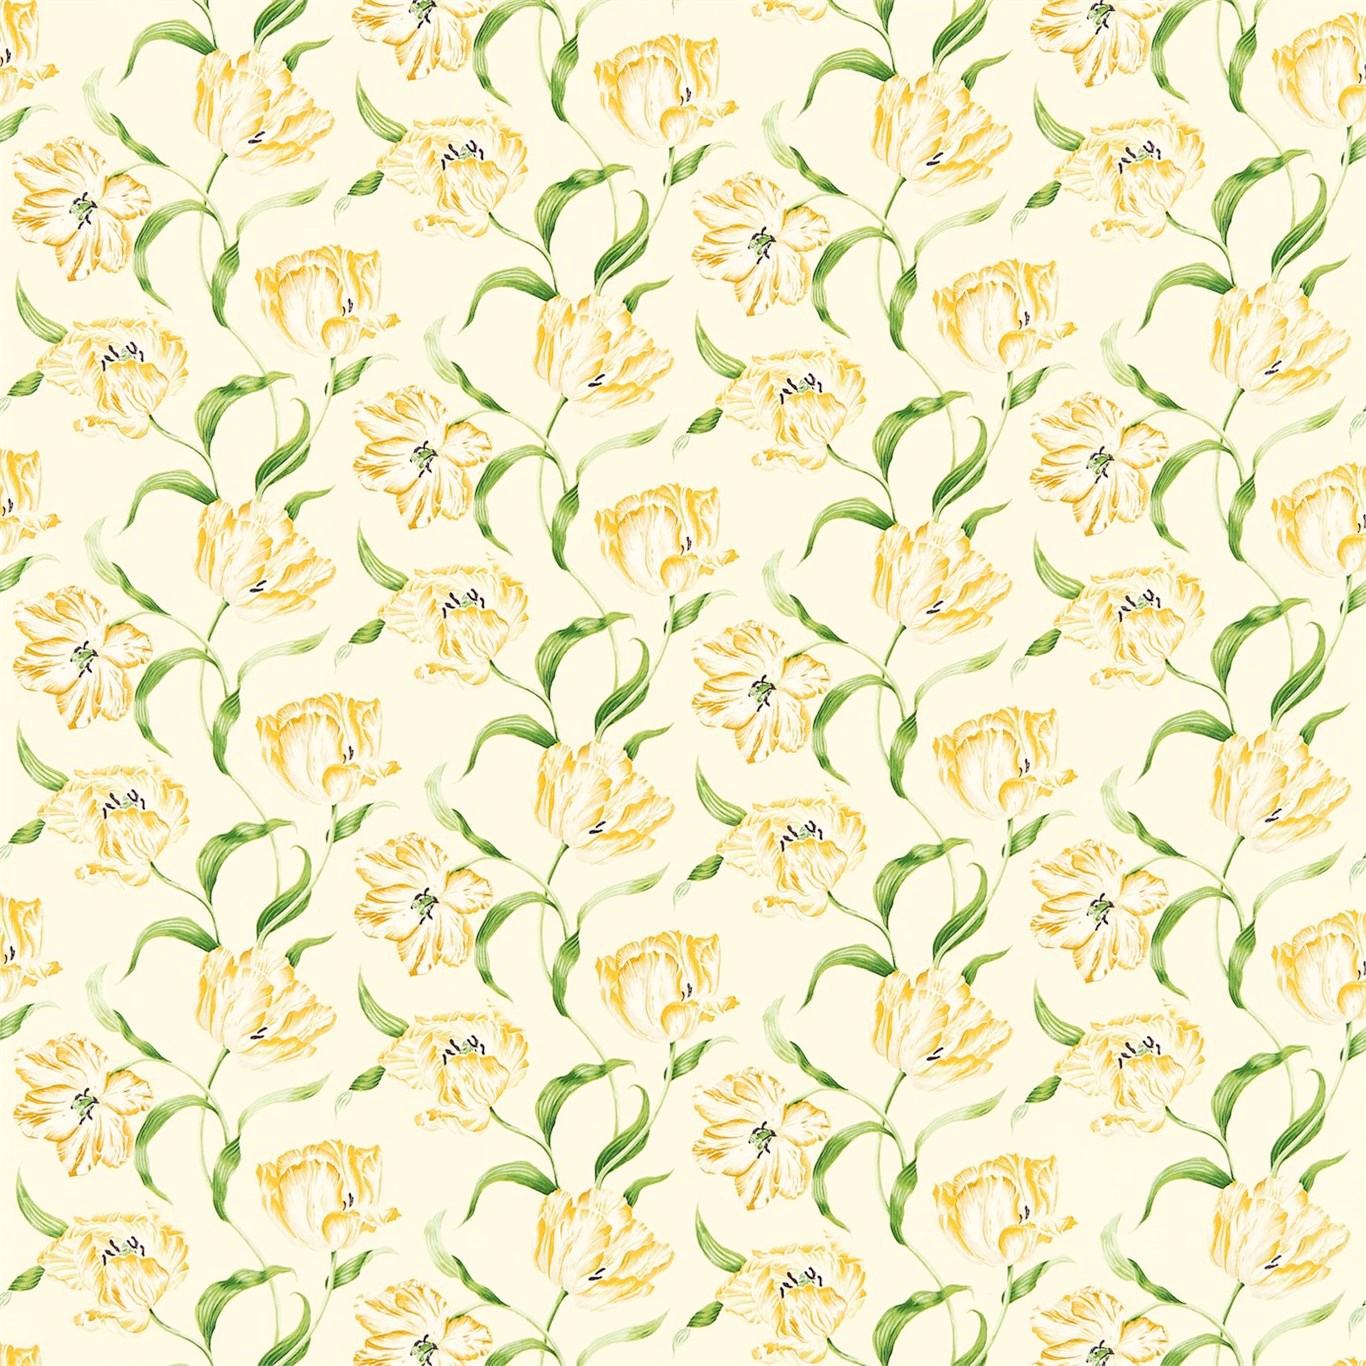 Dancing Tulips Fabric by Sanderson Home - DMAY221951 - Primrose/Green